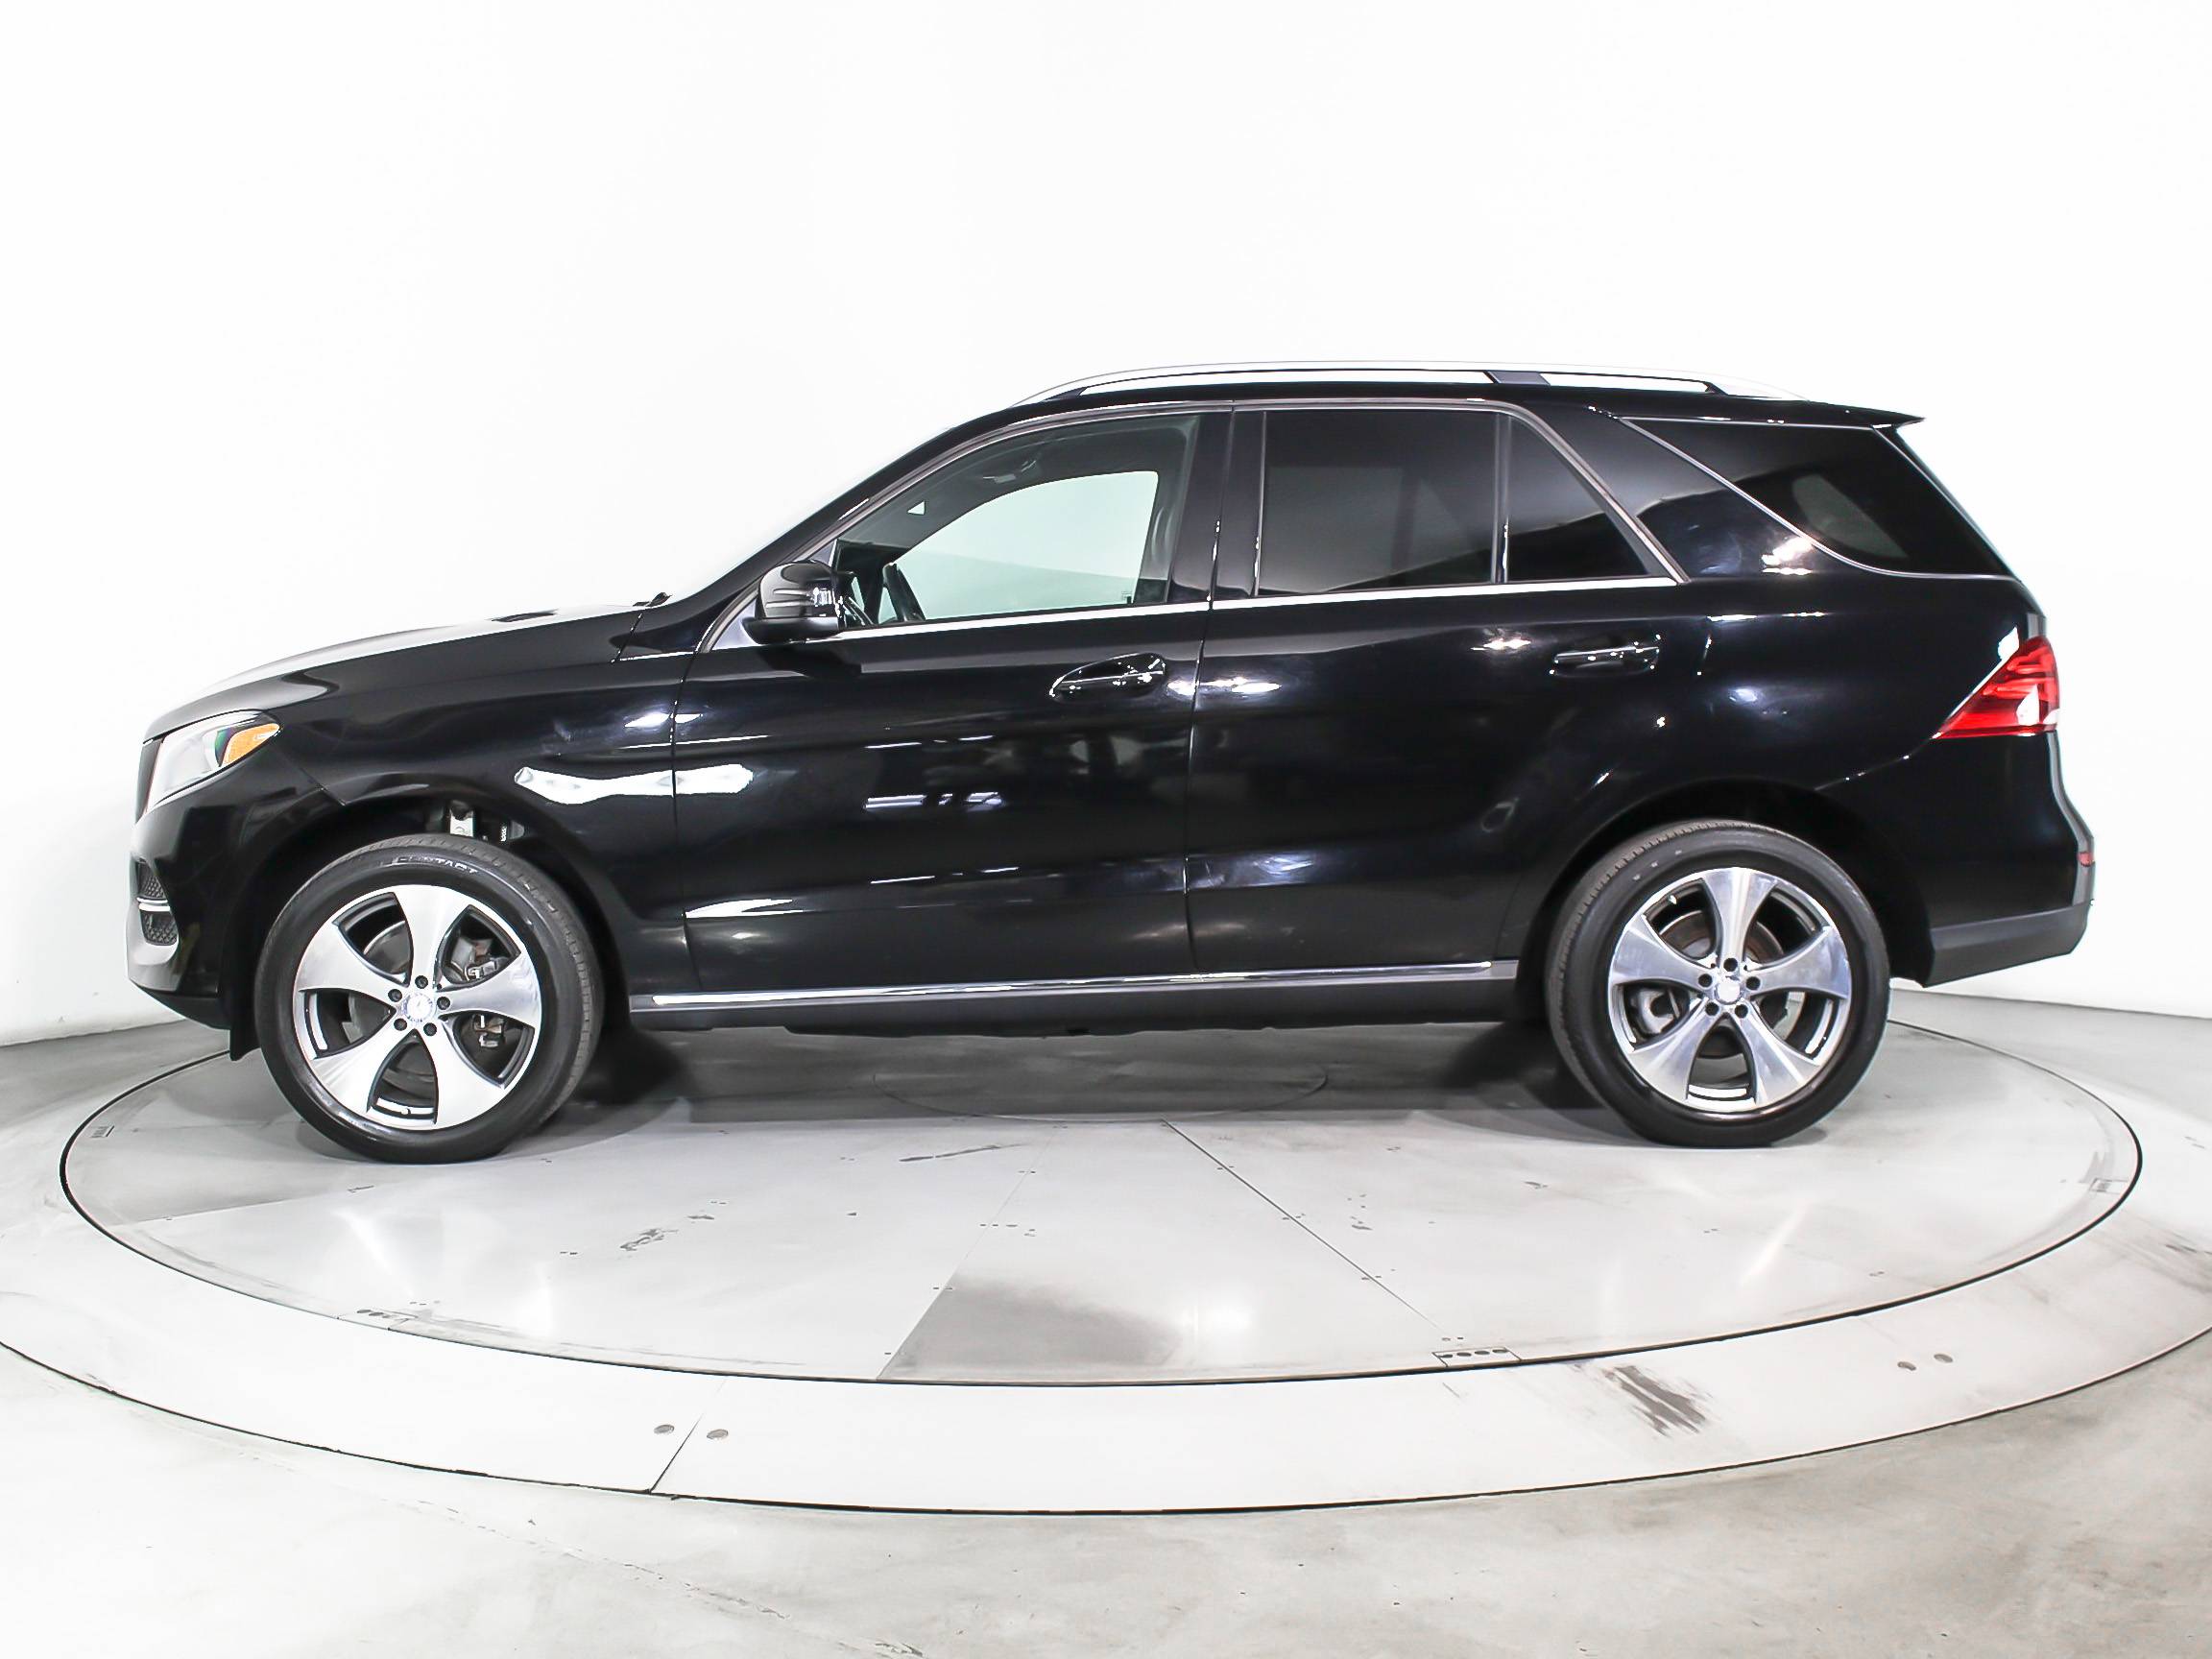 Florida Fine Cars - Used MERCEDES-BENZ GLE CLASS 2016 HOLLYWOOD GLE350 4MATIC